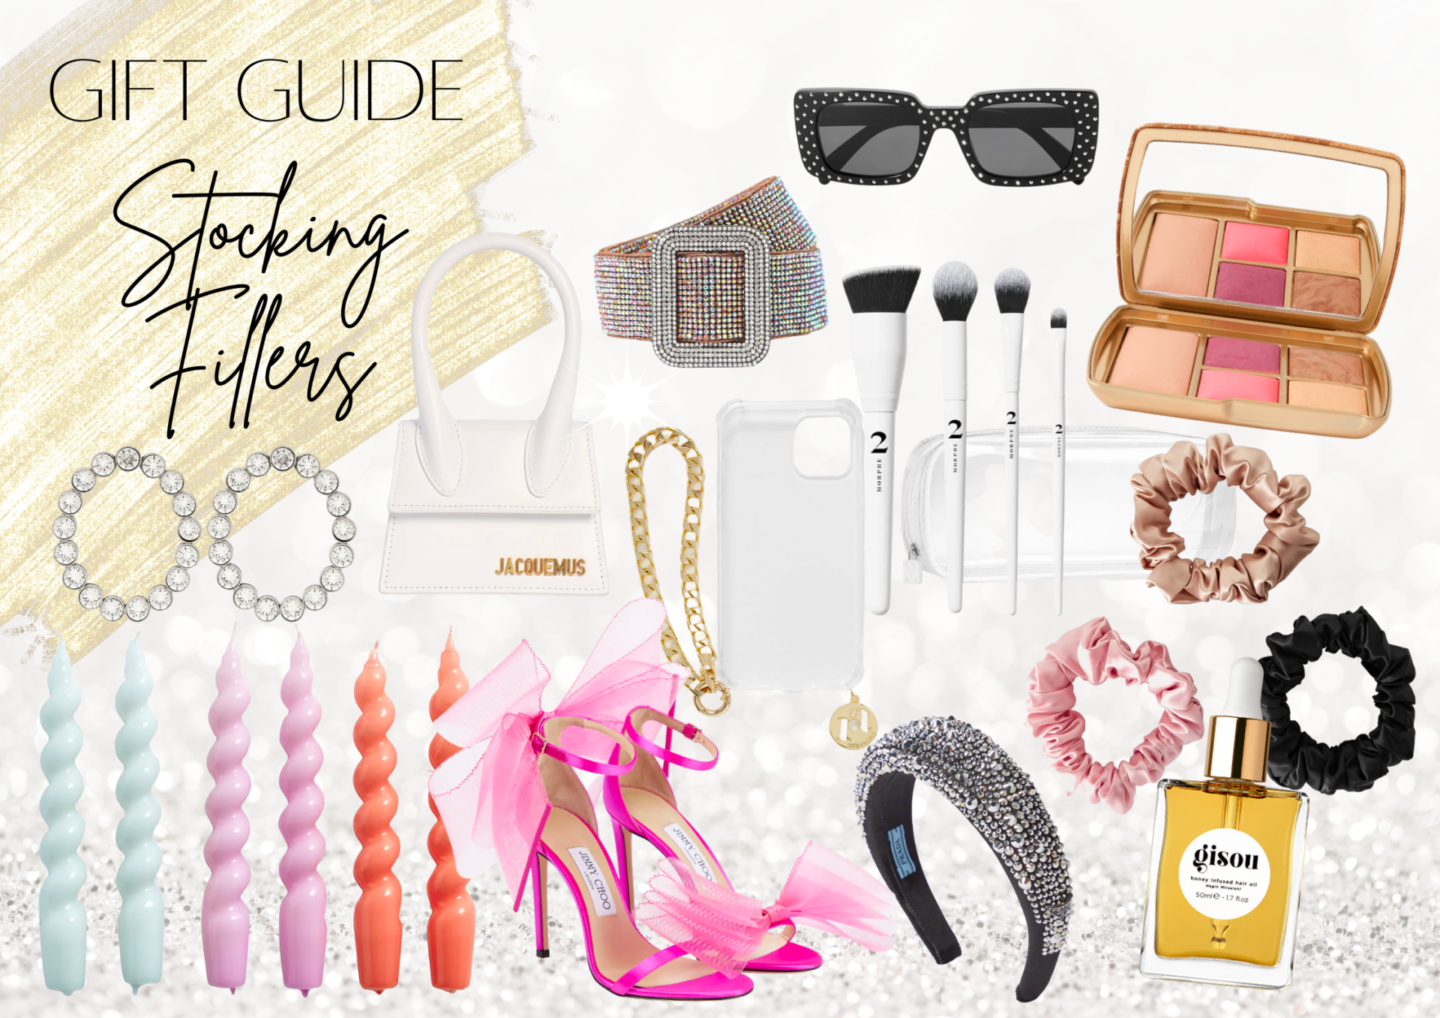 GIFT GUIDE | STOCKING FILLERS